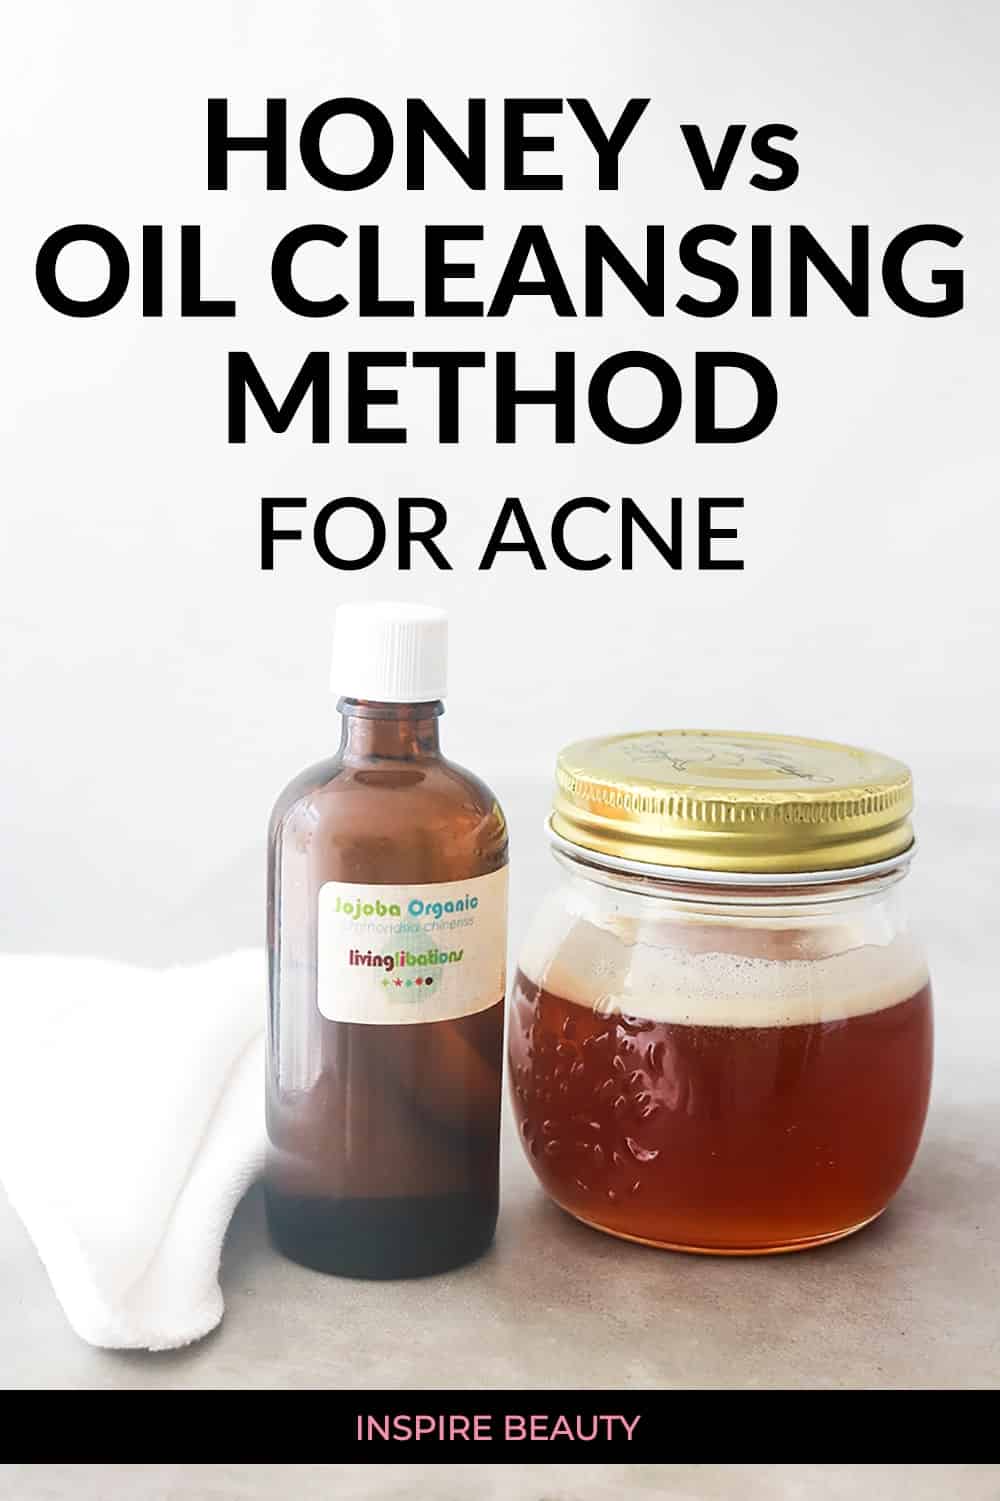 Honey vs Oil Cleansing Method for acne, find out which cleanser is the best for acne prone skin